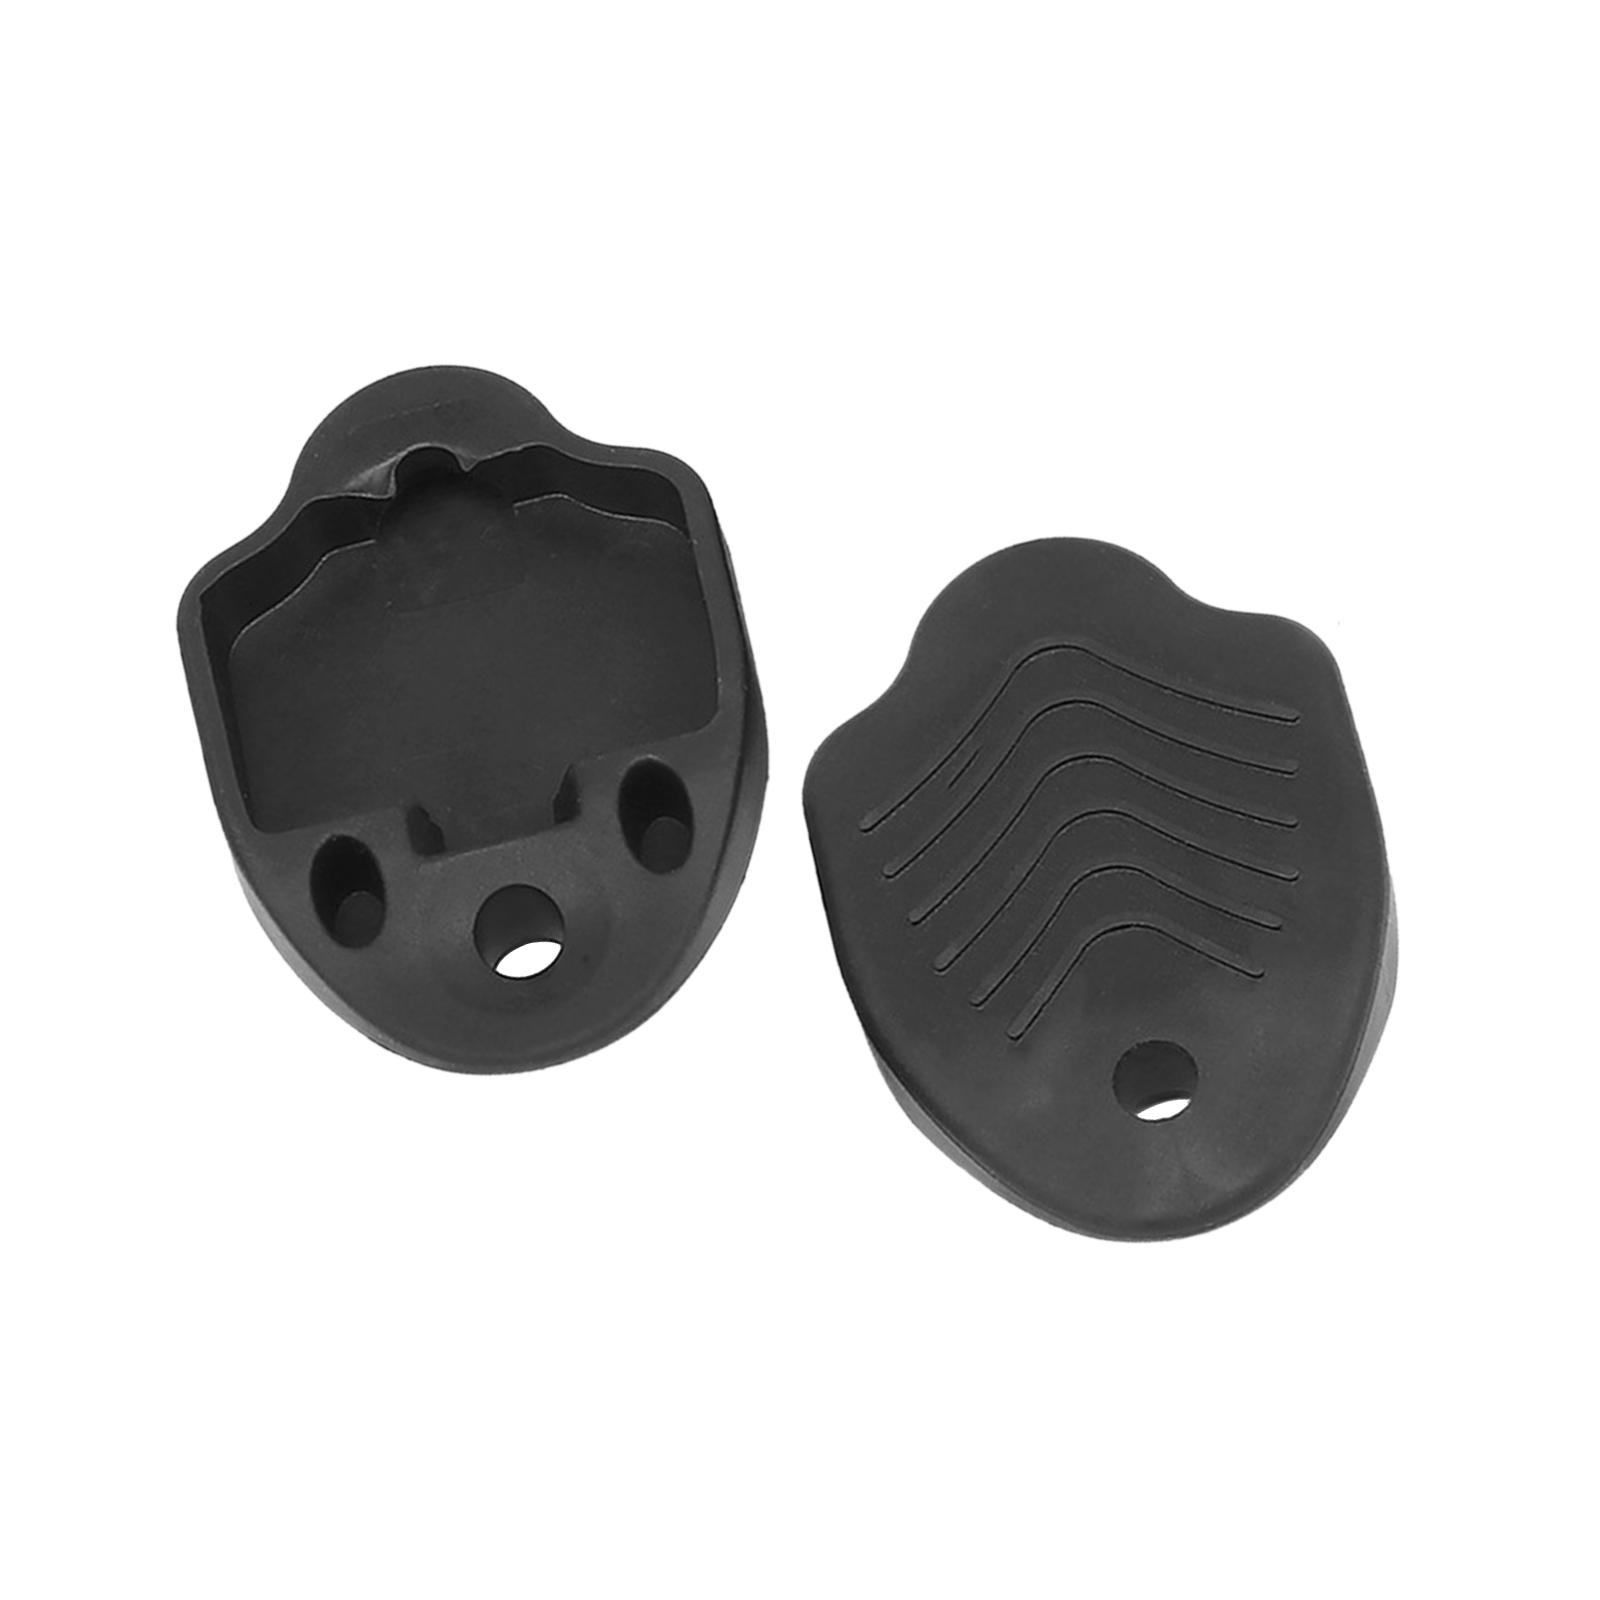 2Pcs Cleat Covers, Cycle Shoes Cleat Cleat Covers Set, Protective Cover Durable Pedals Systems Road Bike - image 1 of 10